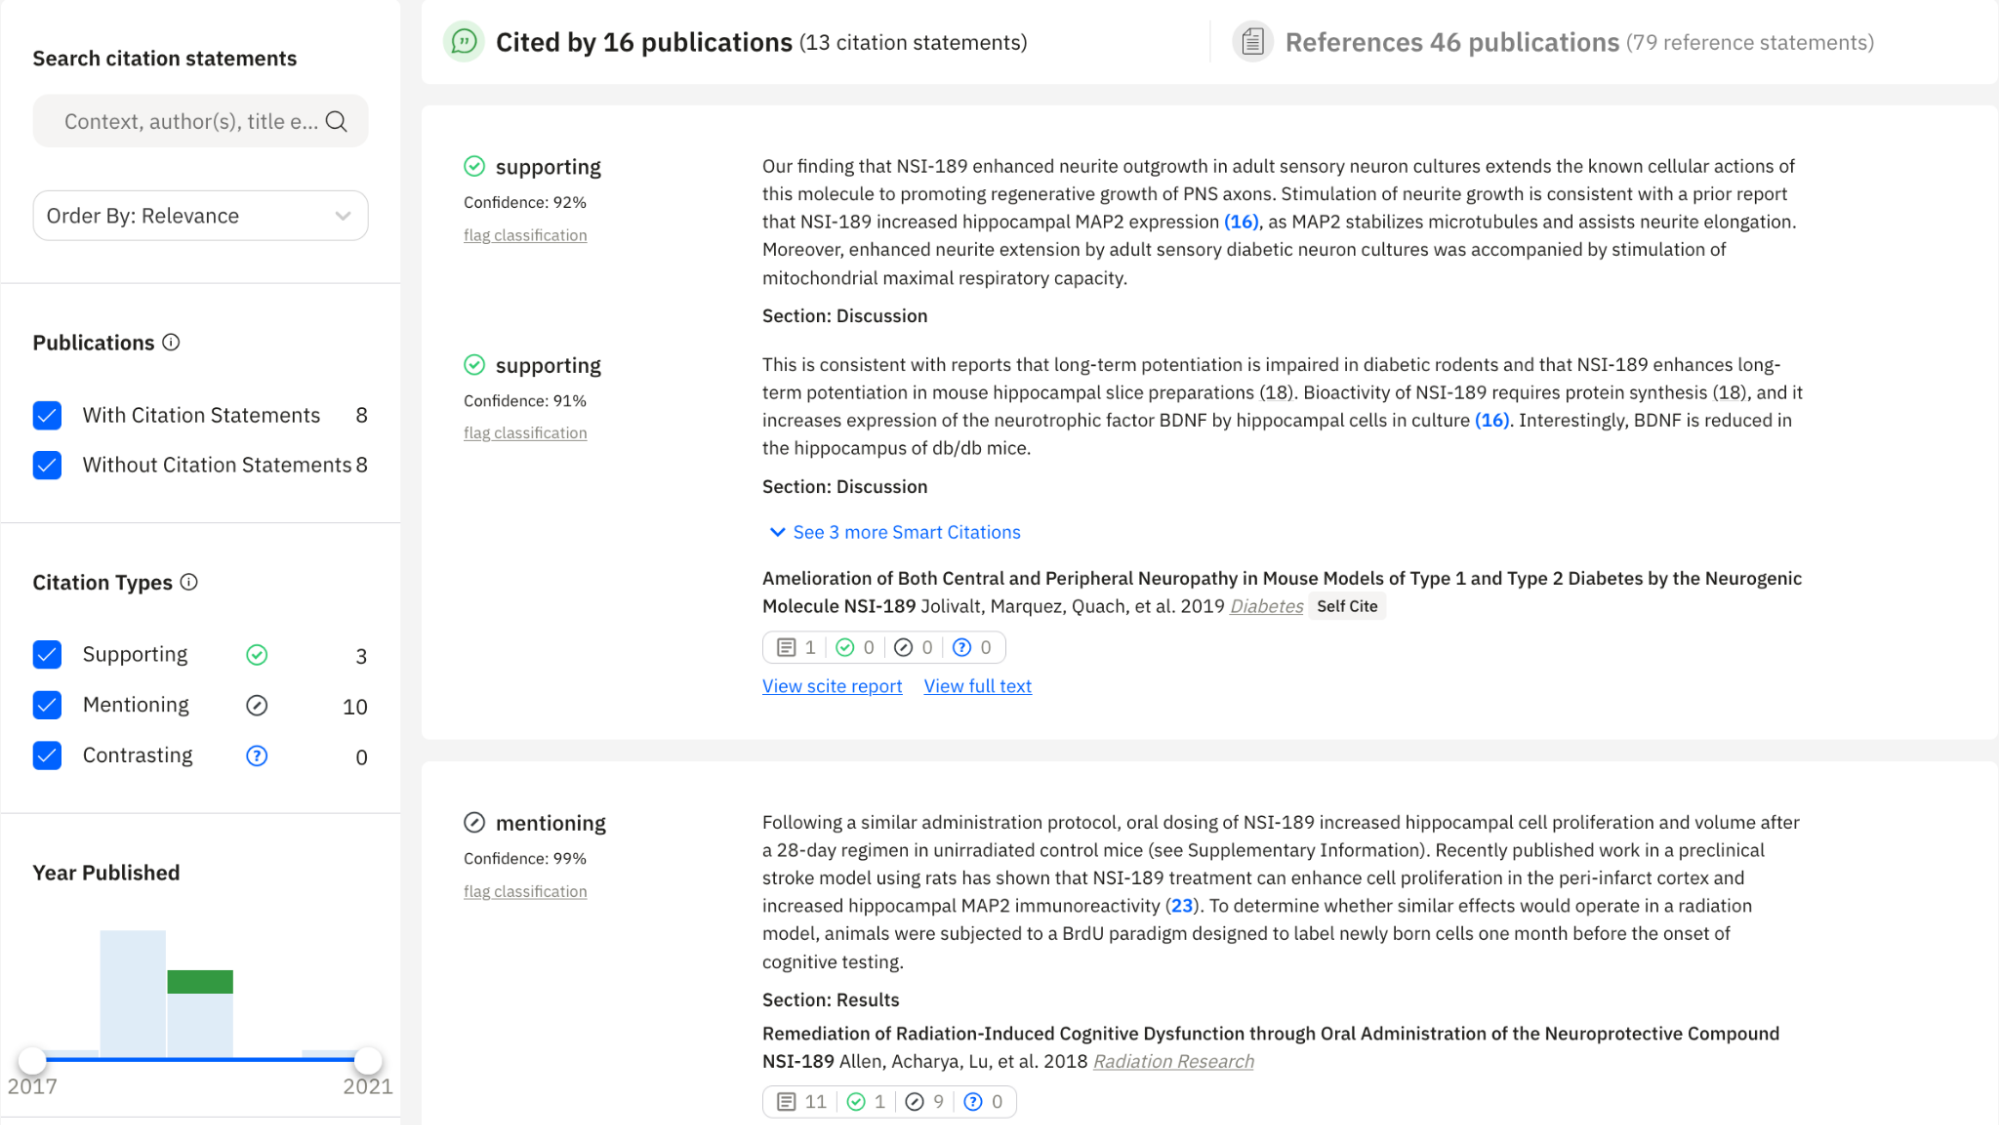 Example of a report page showing citation statements and how they talk about a publication of interest.